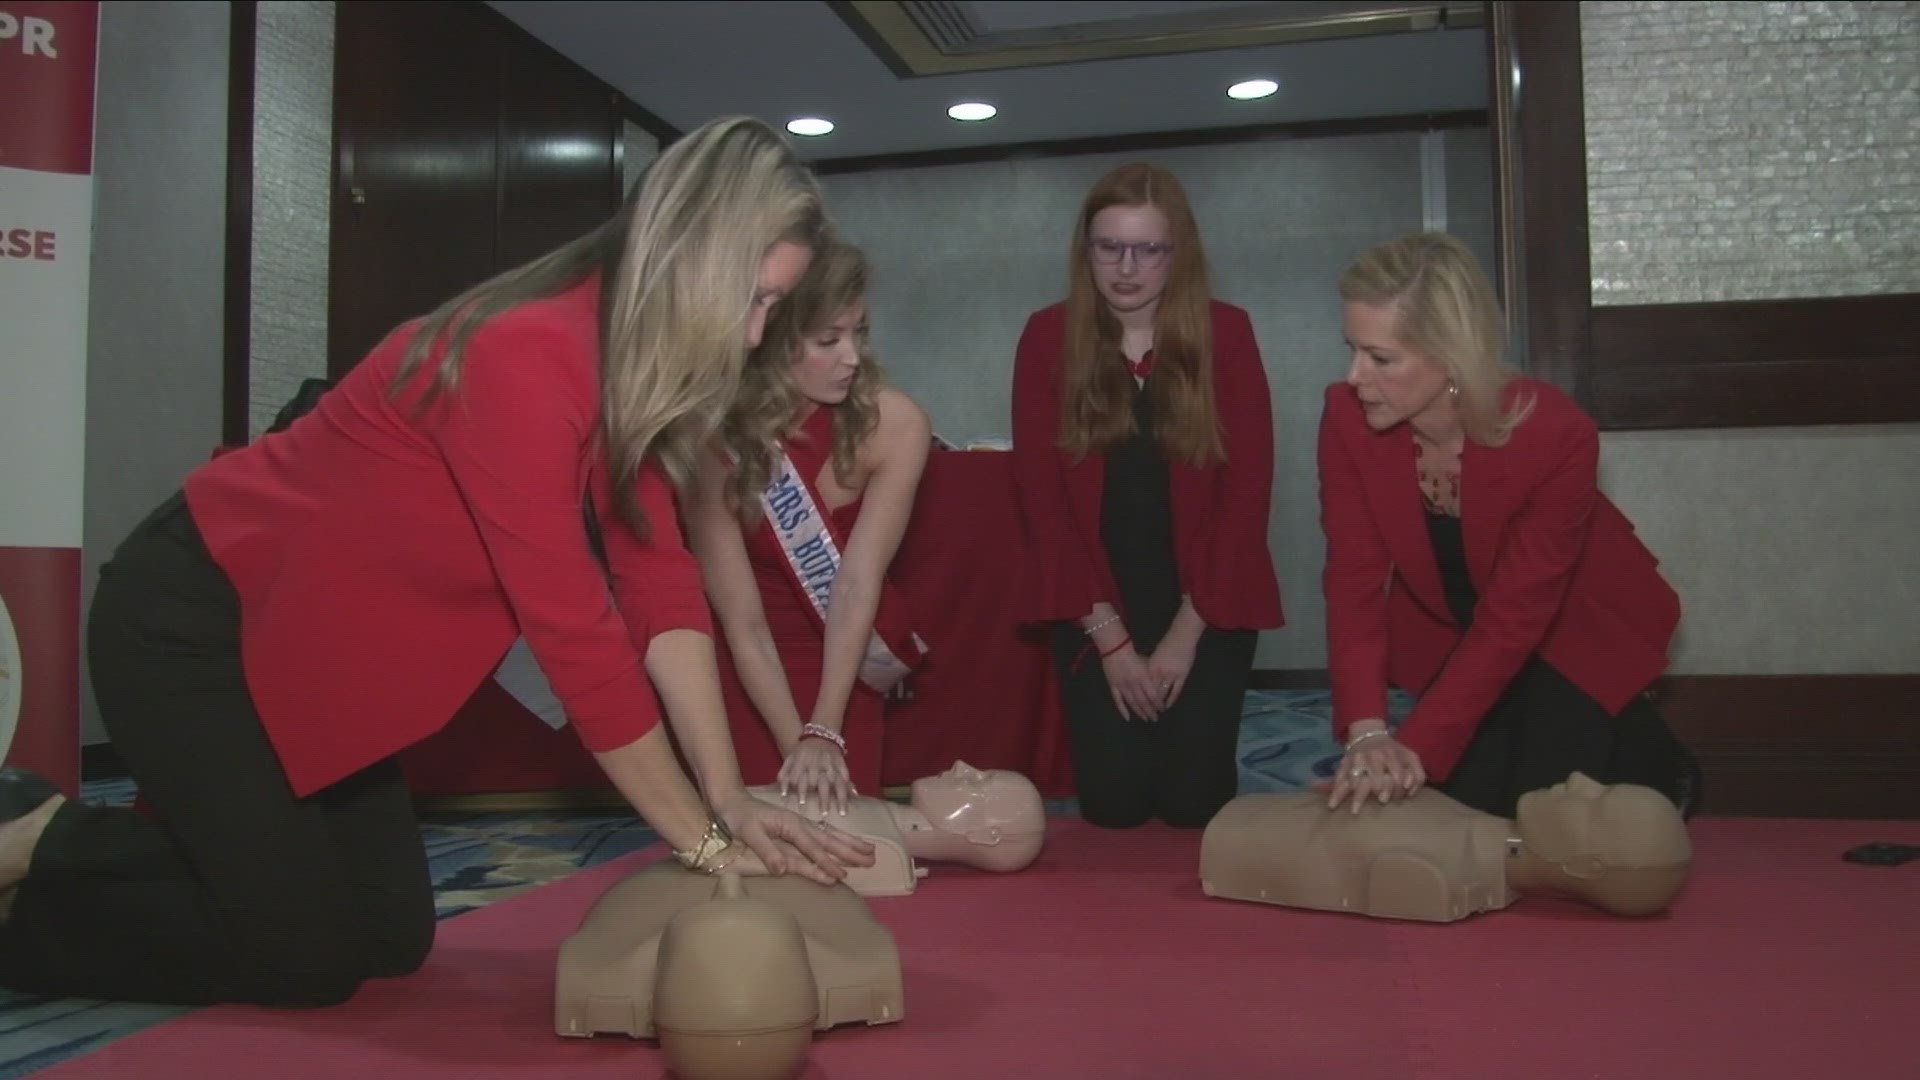 They're also urging everyone to learn *hands only C-P-R... because women don't always get the same first aid as men.